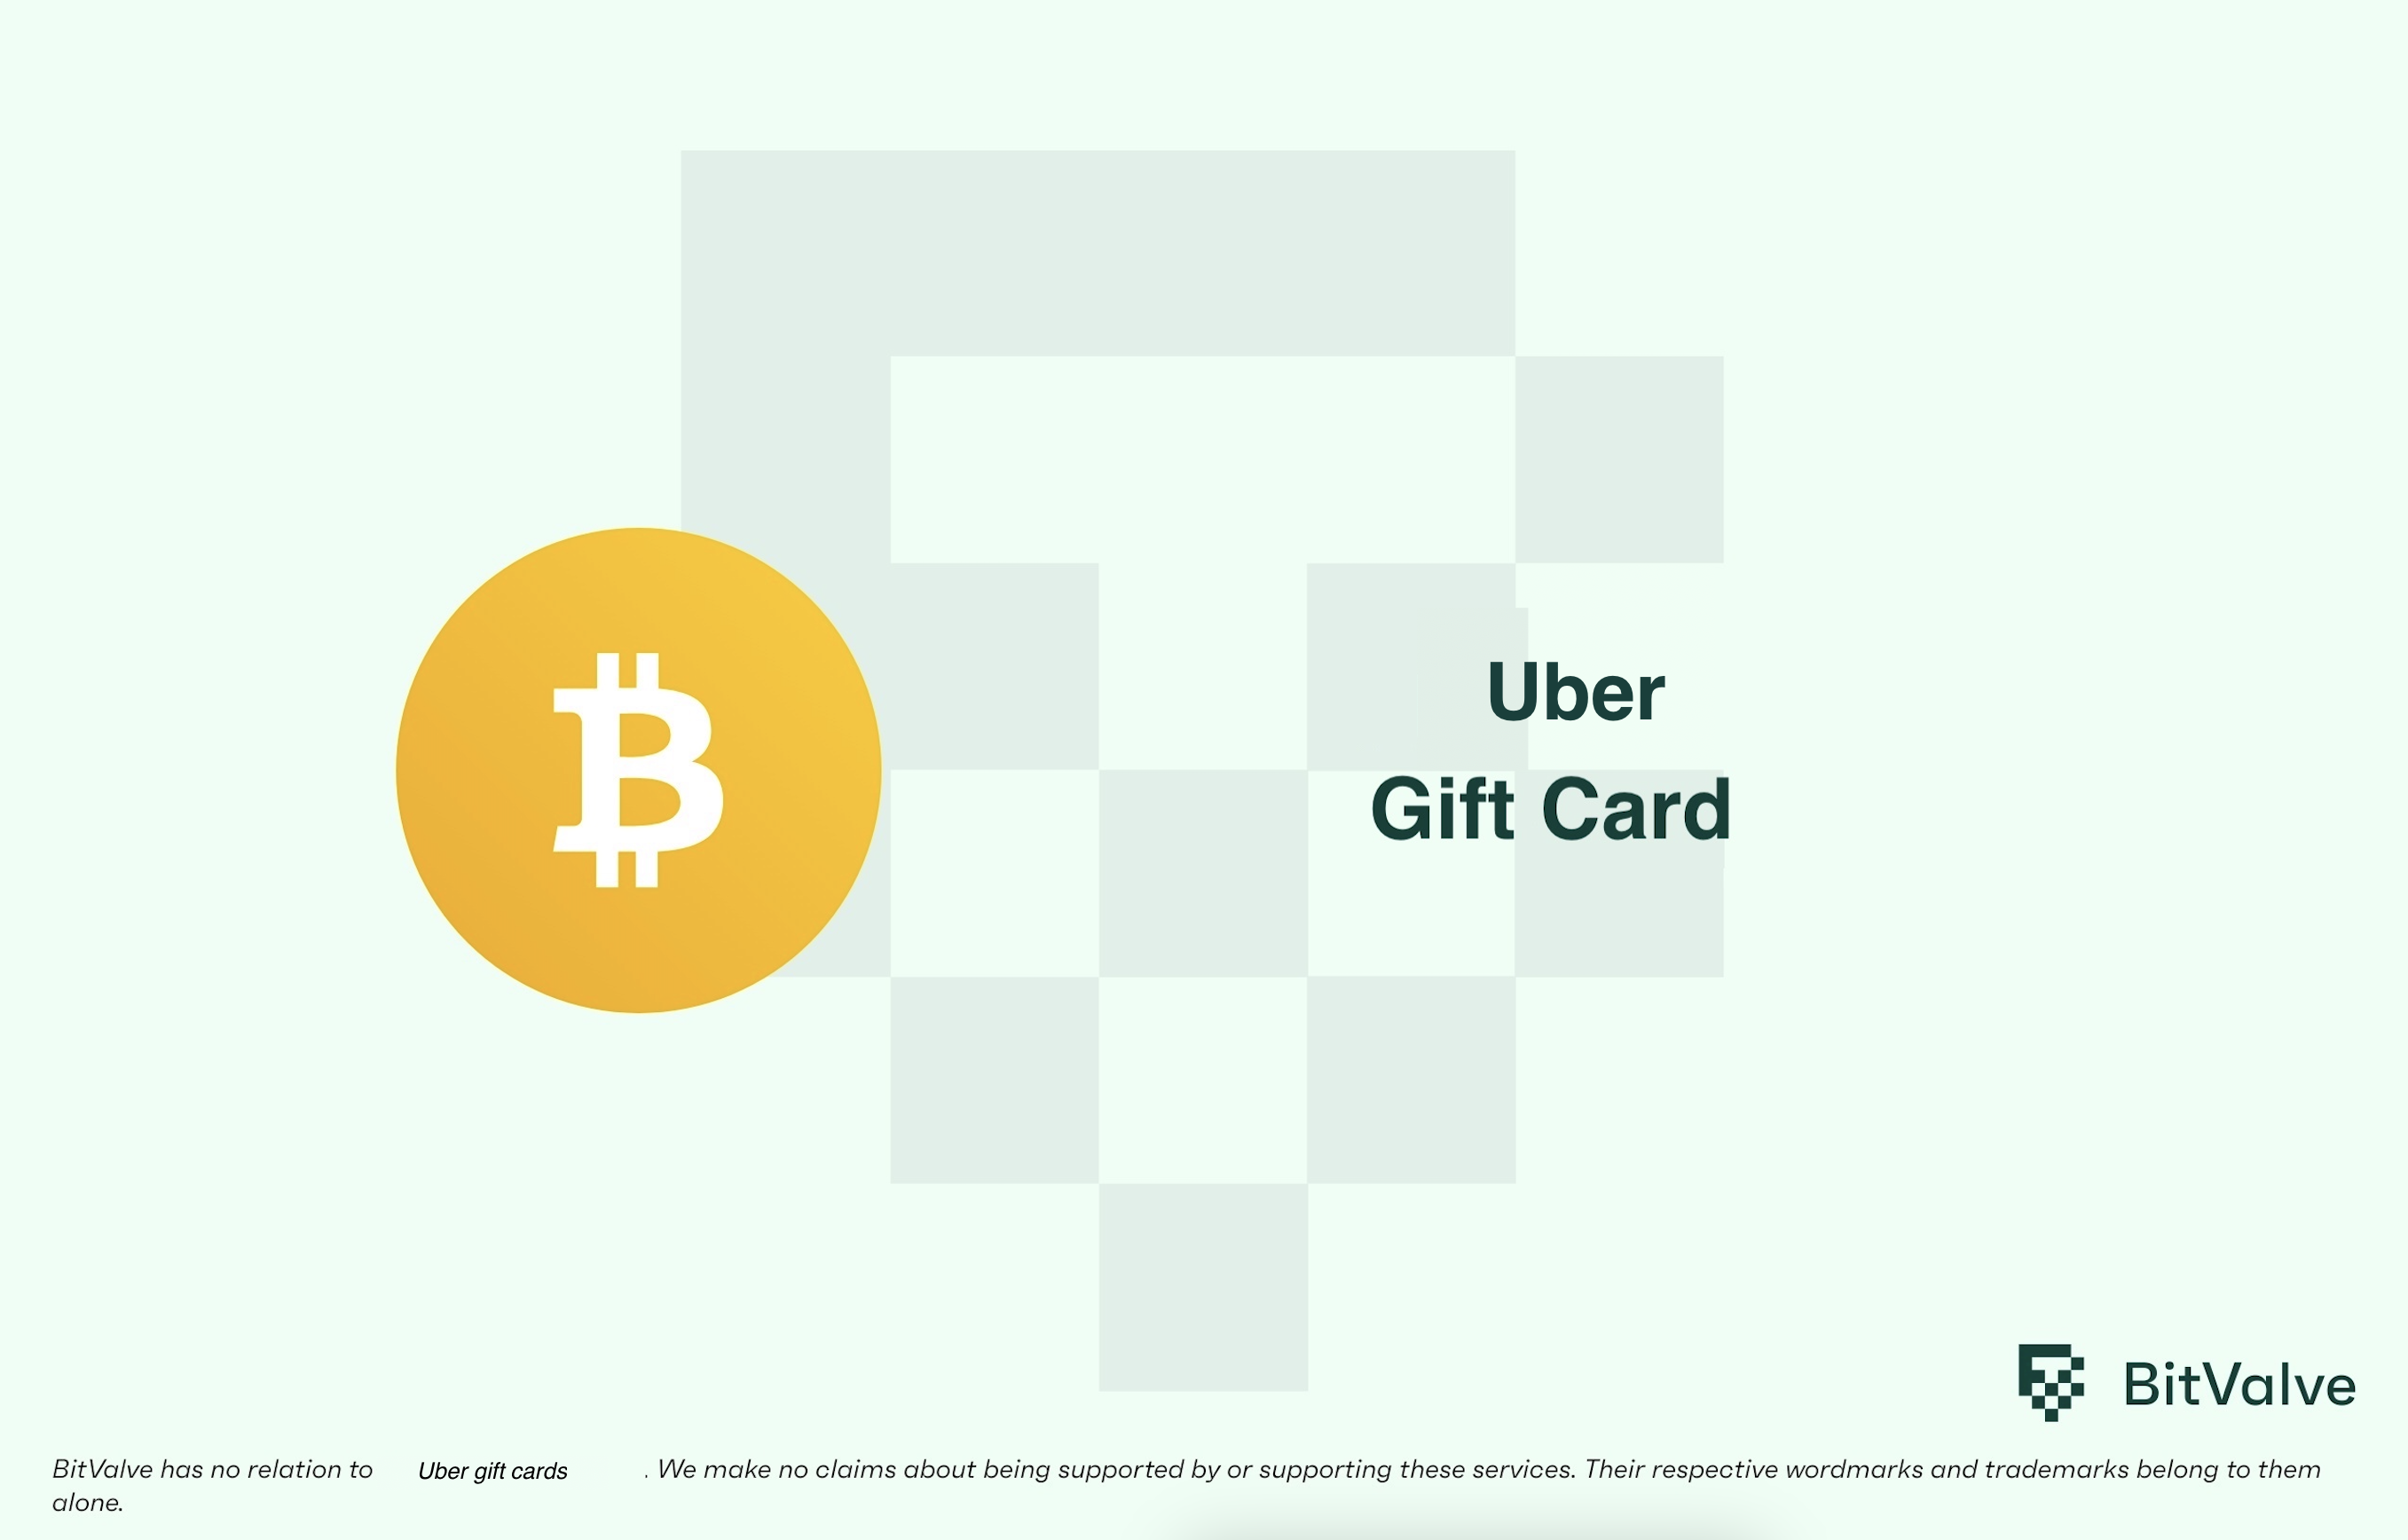 James Prince on LinkedIn: Borrowell Exclusive: Get a $100 Uber Gift Card!